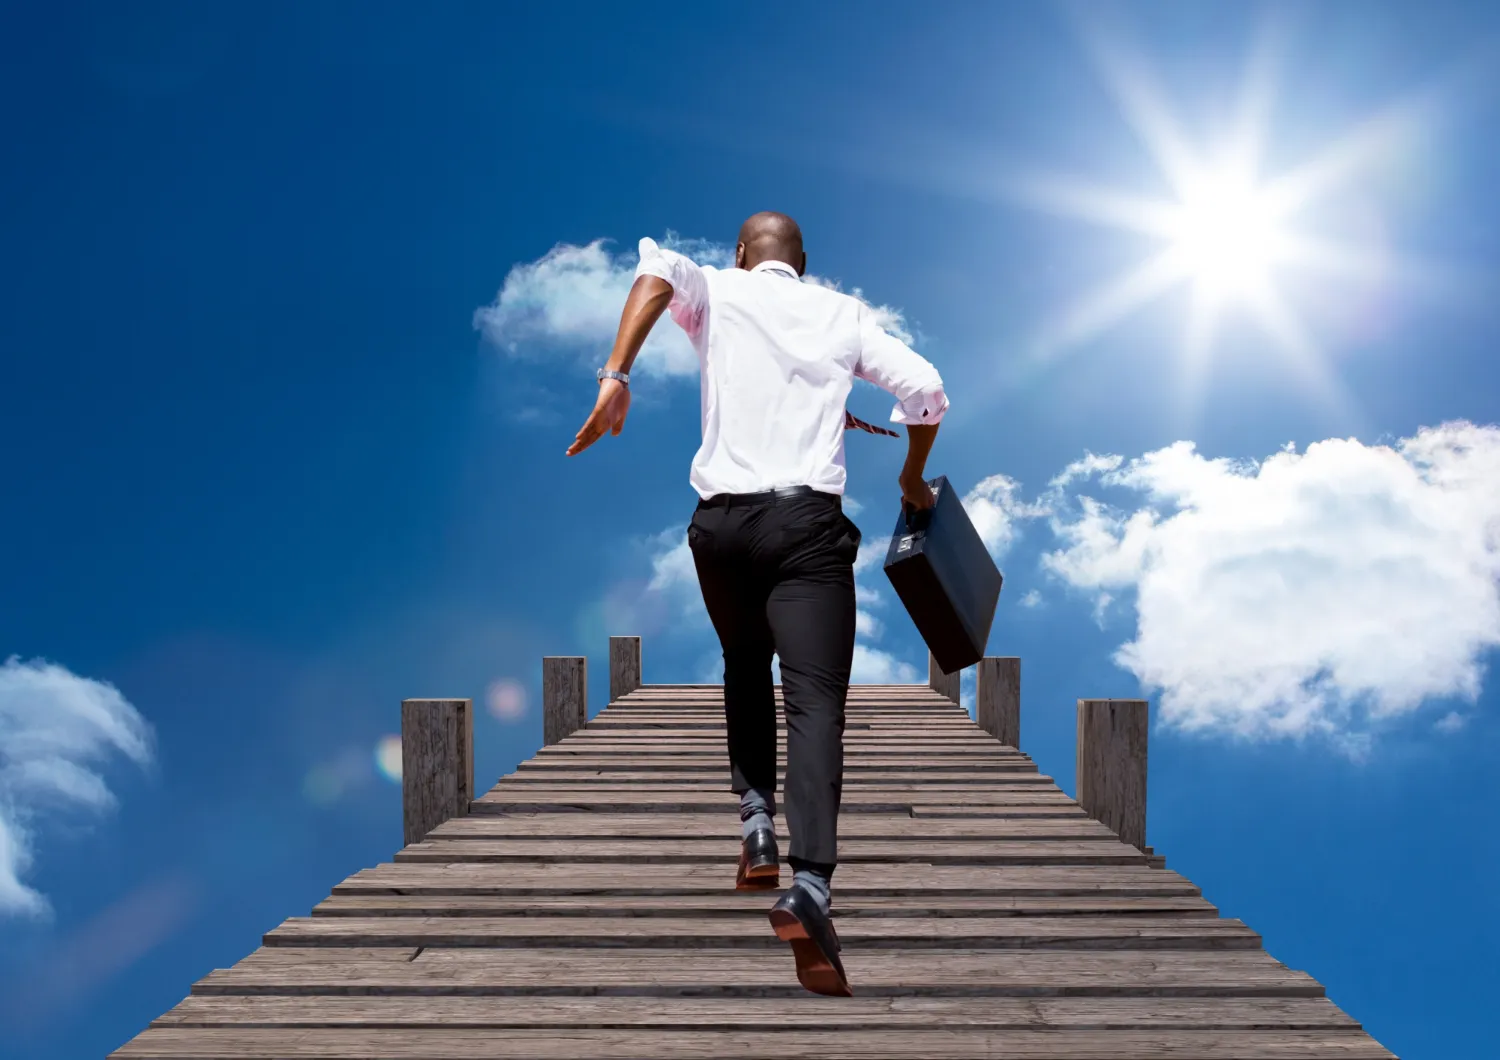 A businessman confidently strides upwards on a wooden staircase against a bright sky, symbolizing career progression from manager to director as discussed in JOH Partners' blog on career advancement.